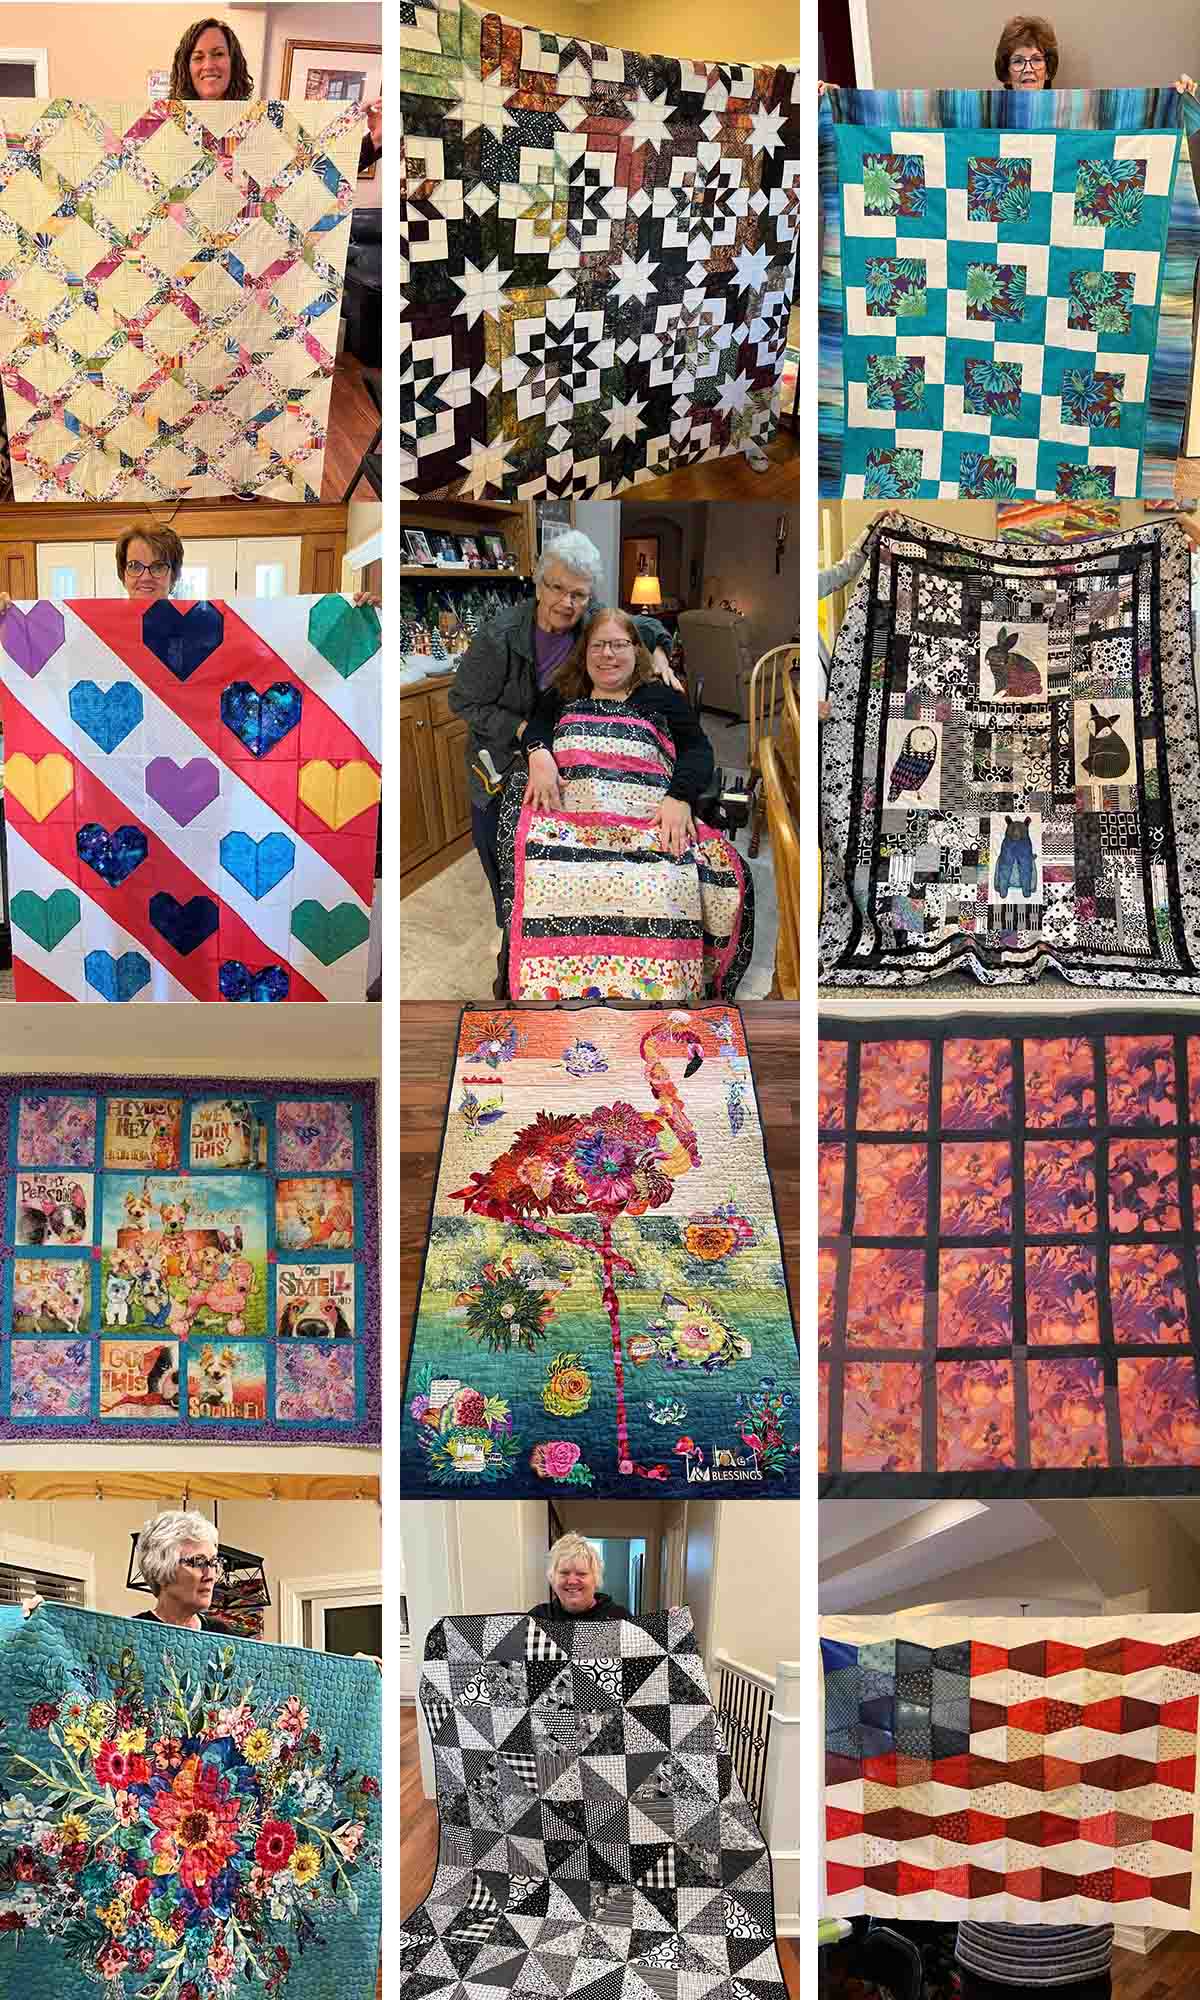 A collage of quilts hand-made by the Becker women.